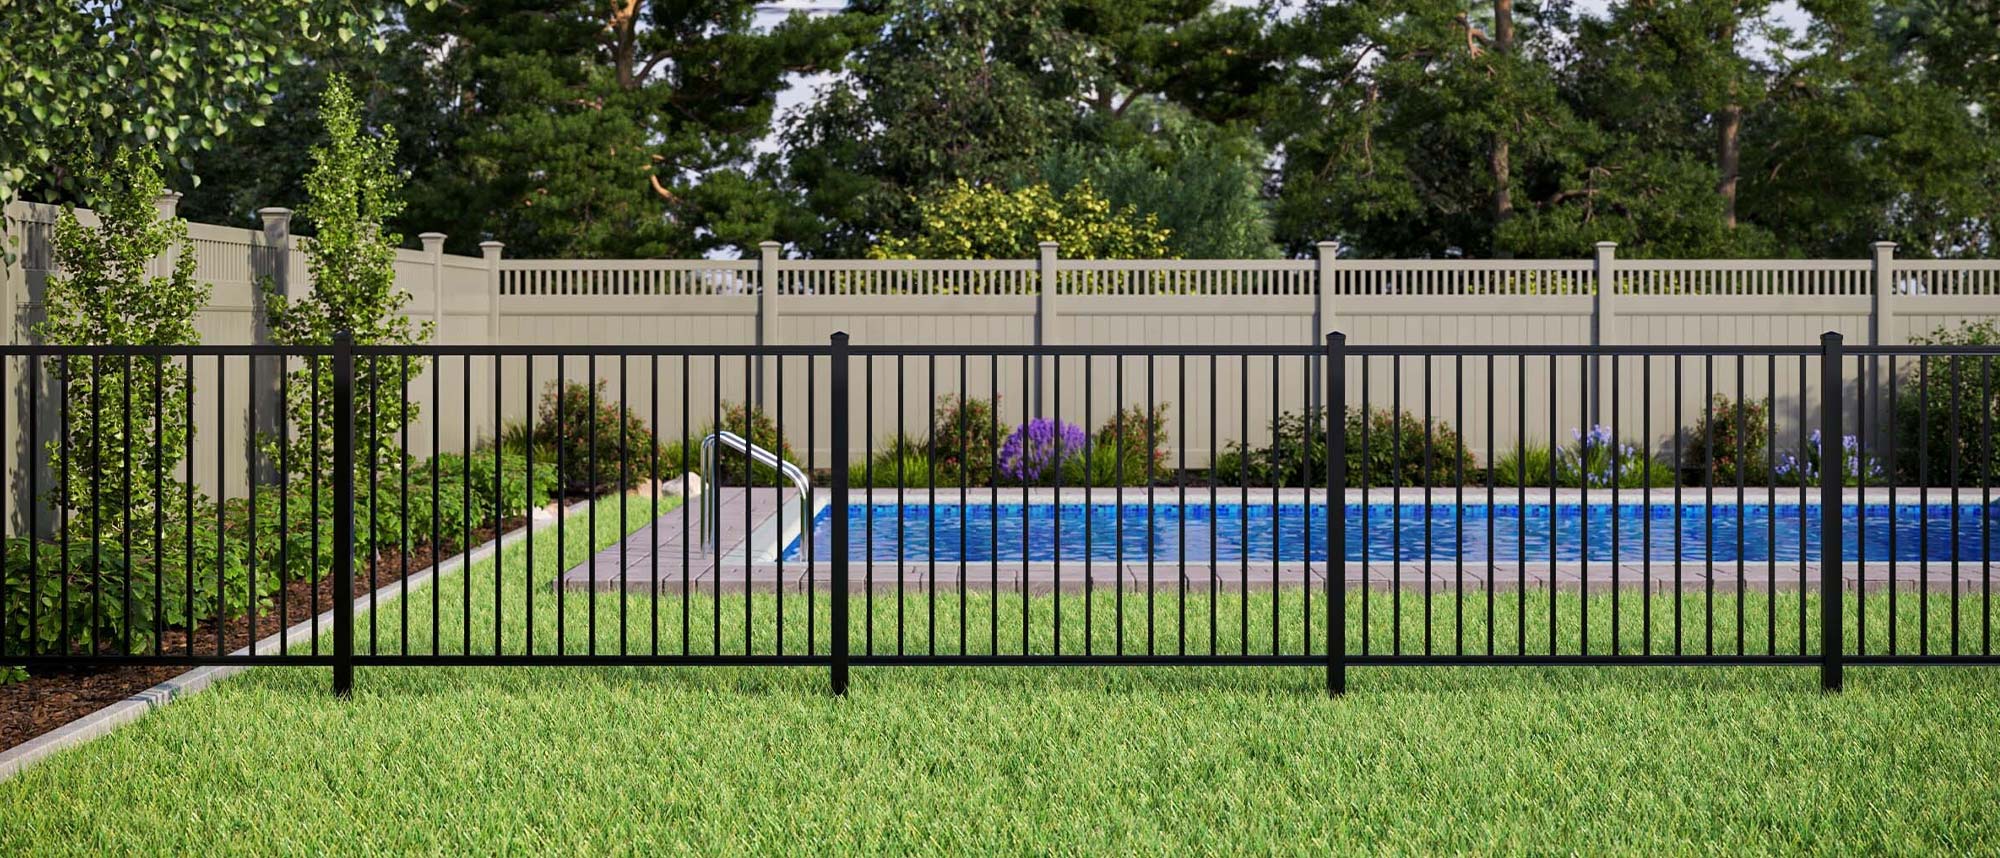 Evansville Indiana Aluminum Security Fence - Bedrock Style